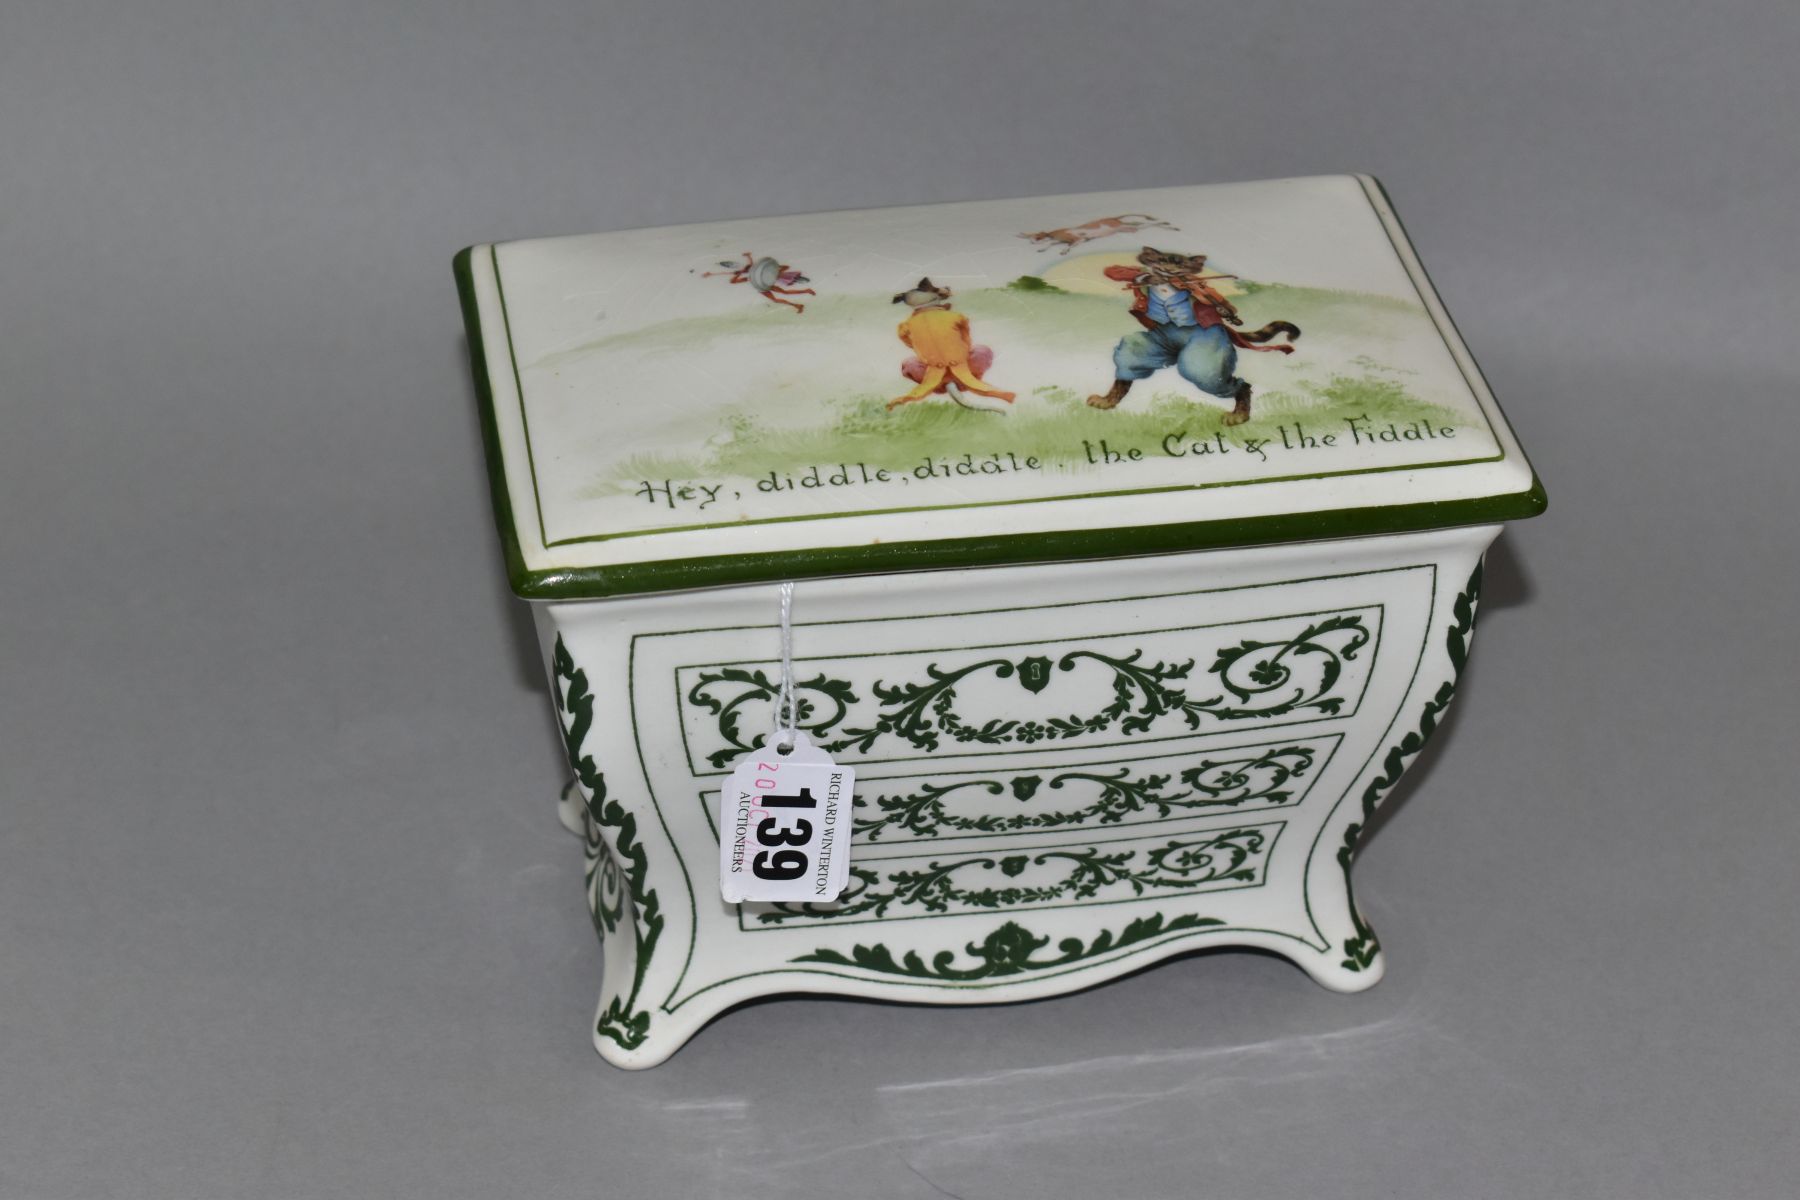 A ROYAL DOULTON NURSERY RHYMES 'A' SERIES WARE HUNTLEY & PALMERS BISCUIT CASKET IN THE FORM OF A